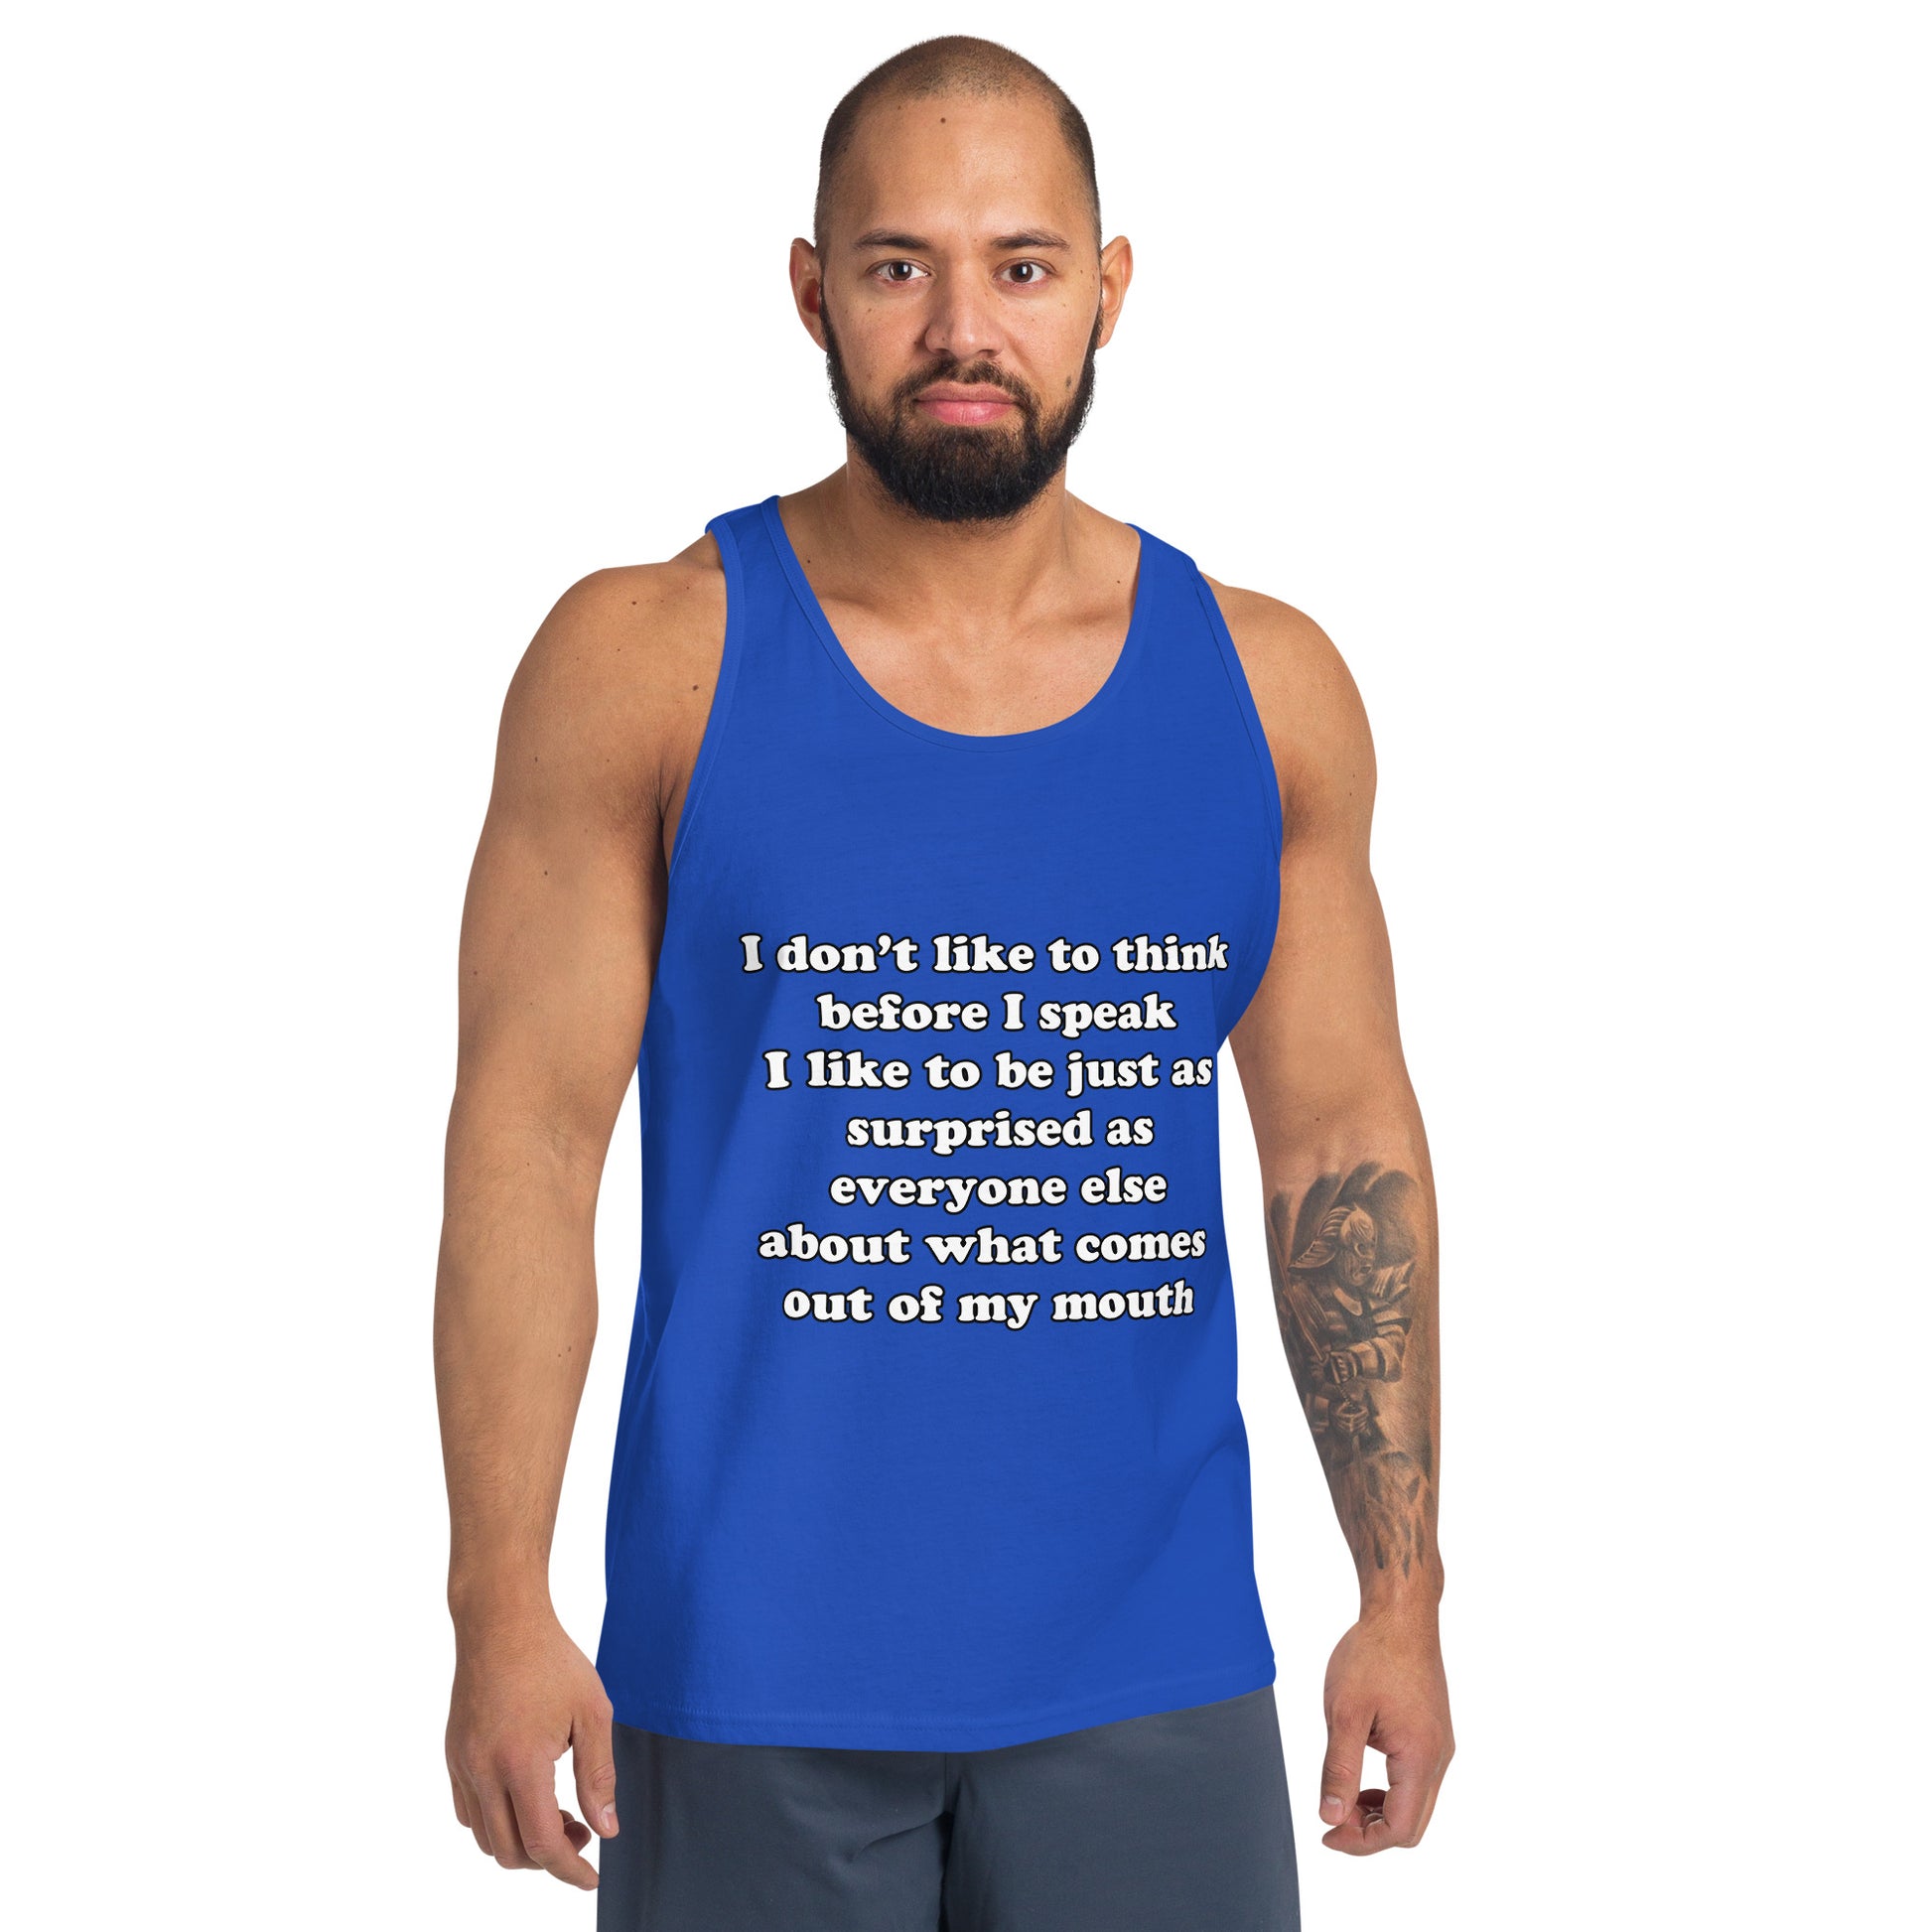 Man with royal blue tank top with text “I don't think before I speak Just as serprised as everyone about what comes out of my mouth"